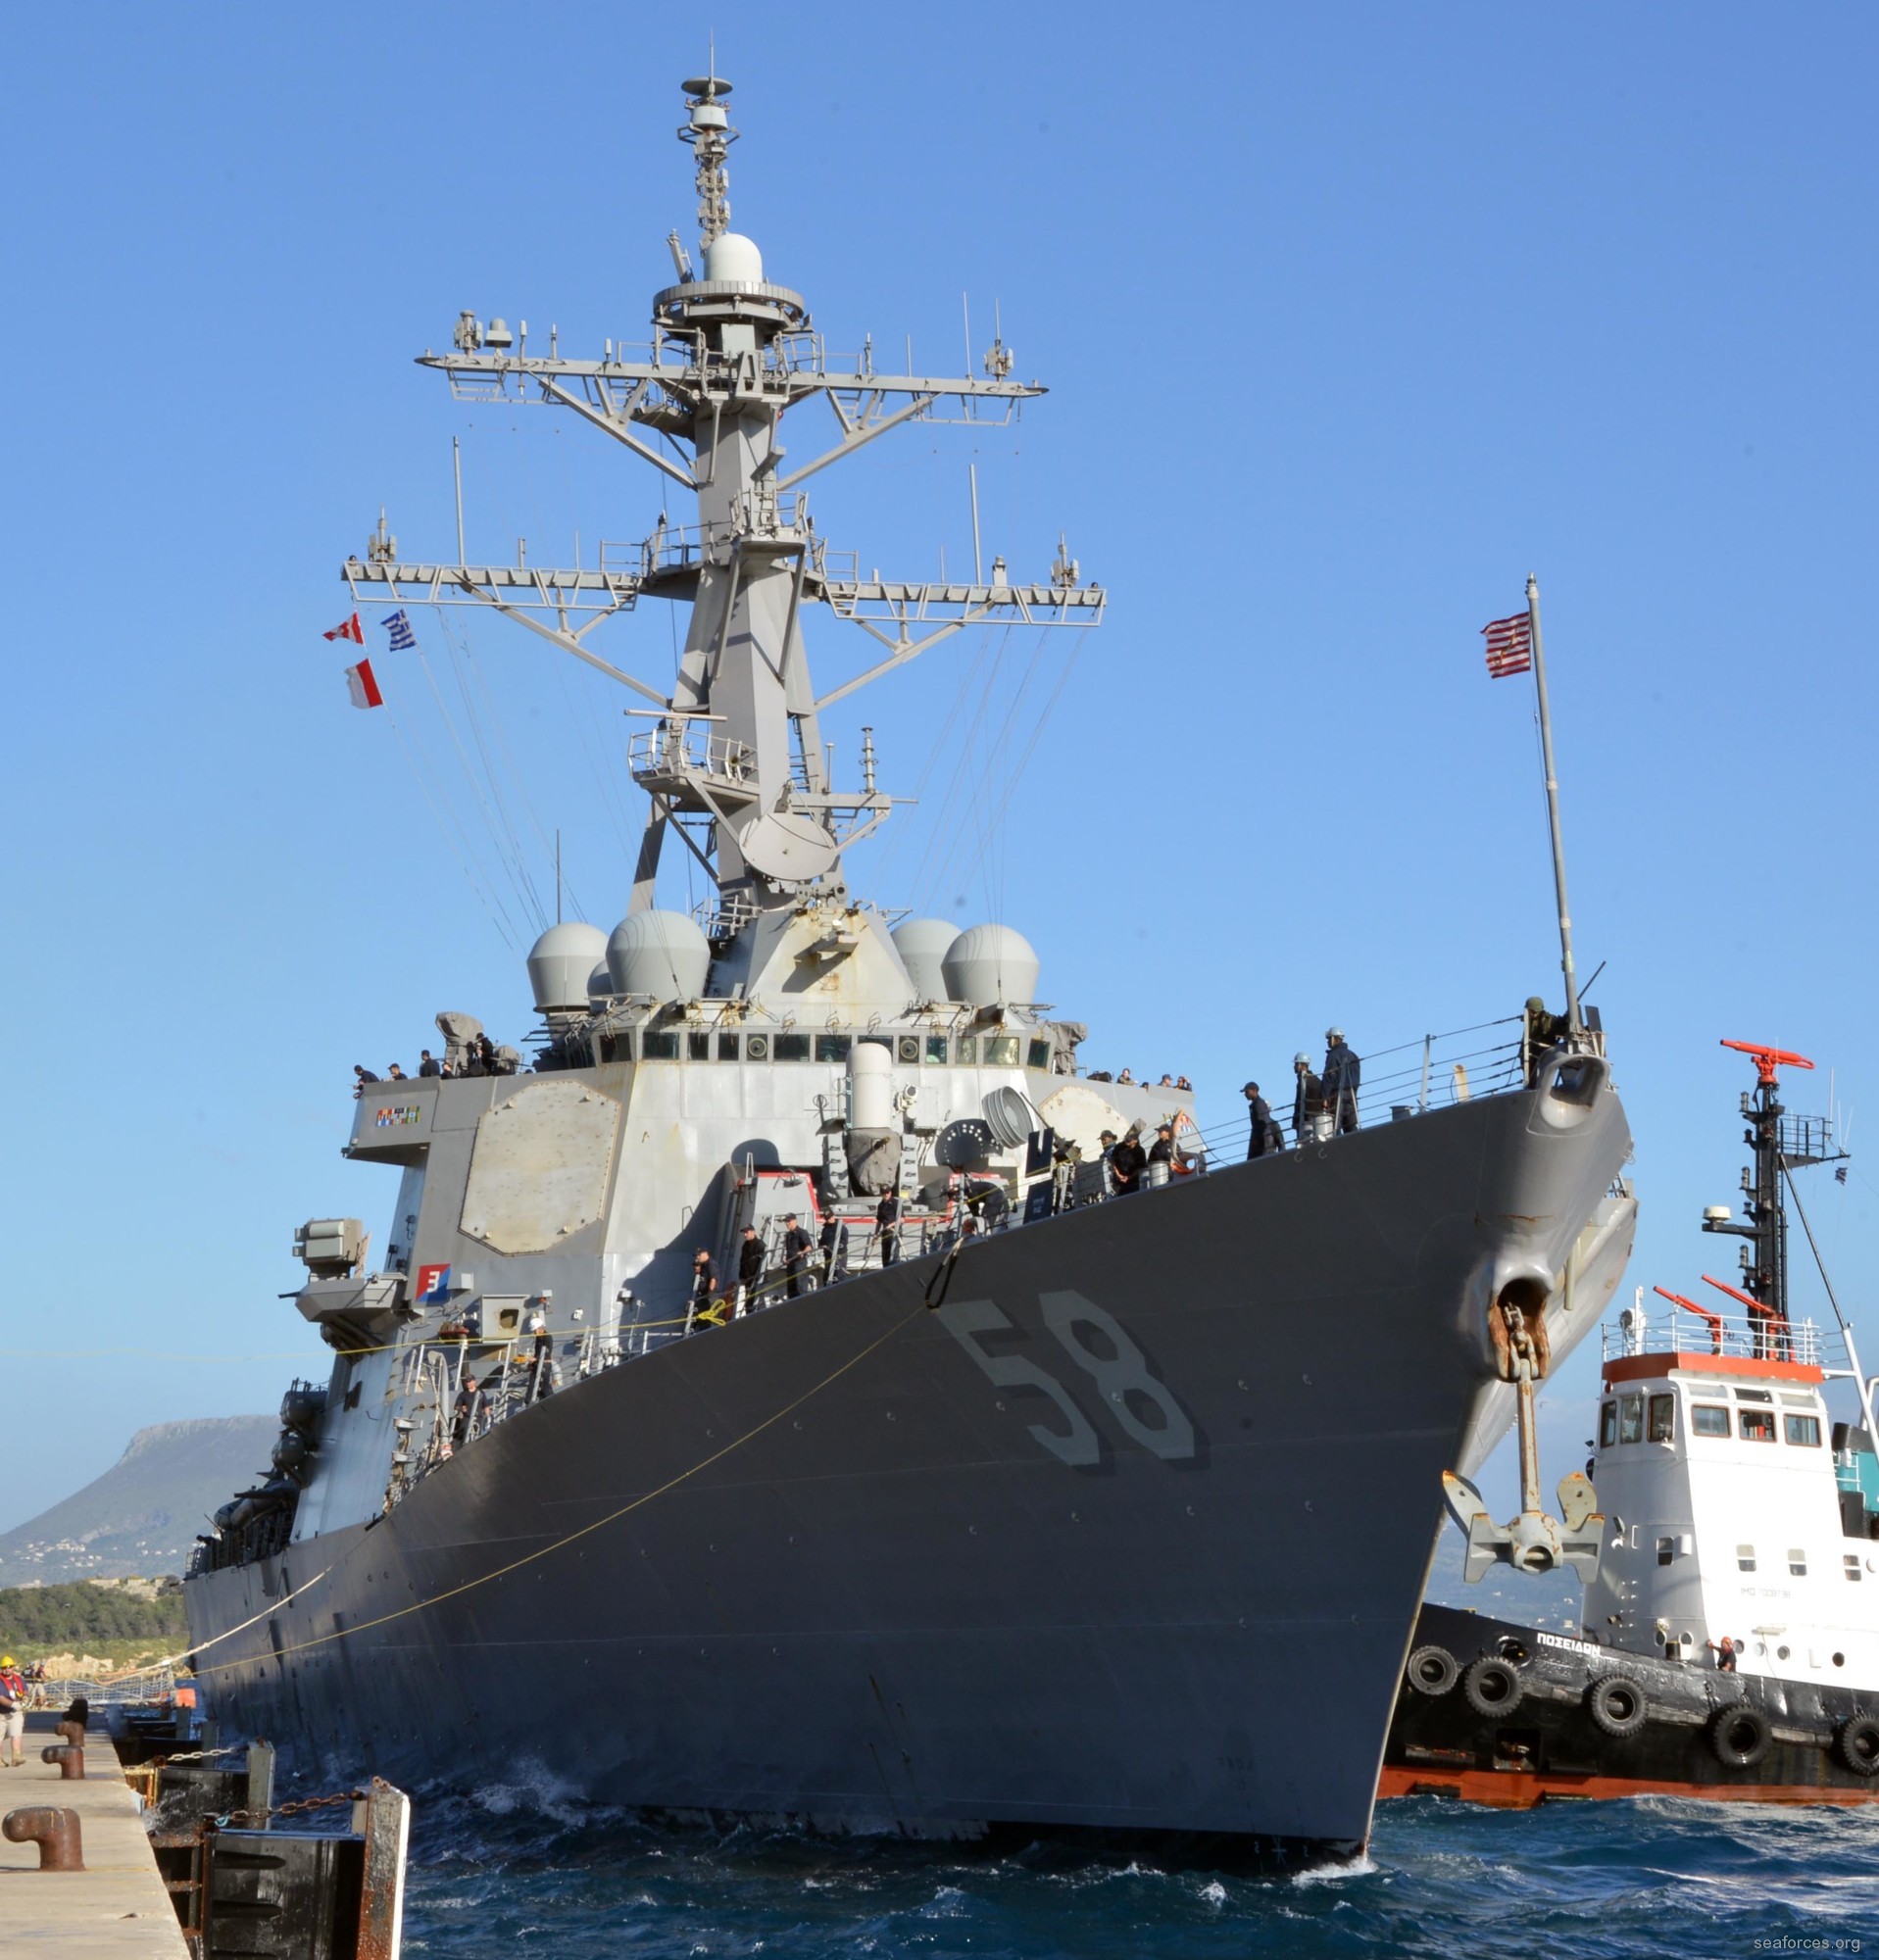 ddg-58 uss laboon guided missile destroyer us navy 87 aegis combat system